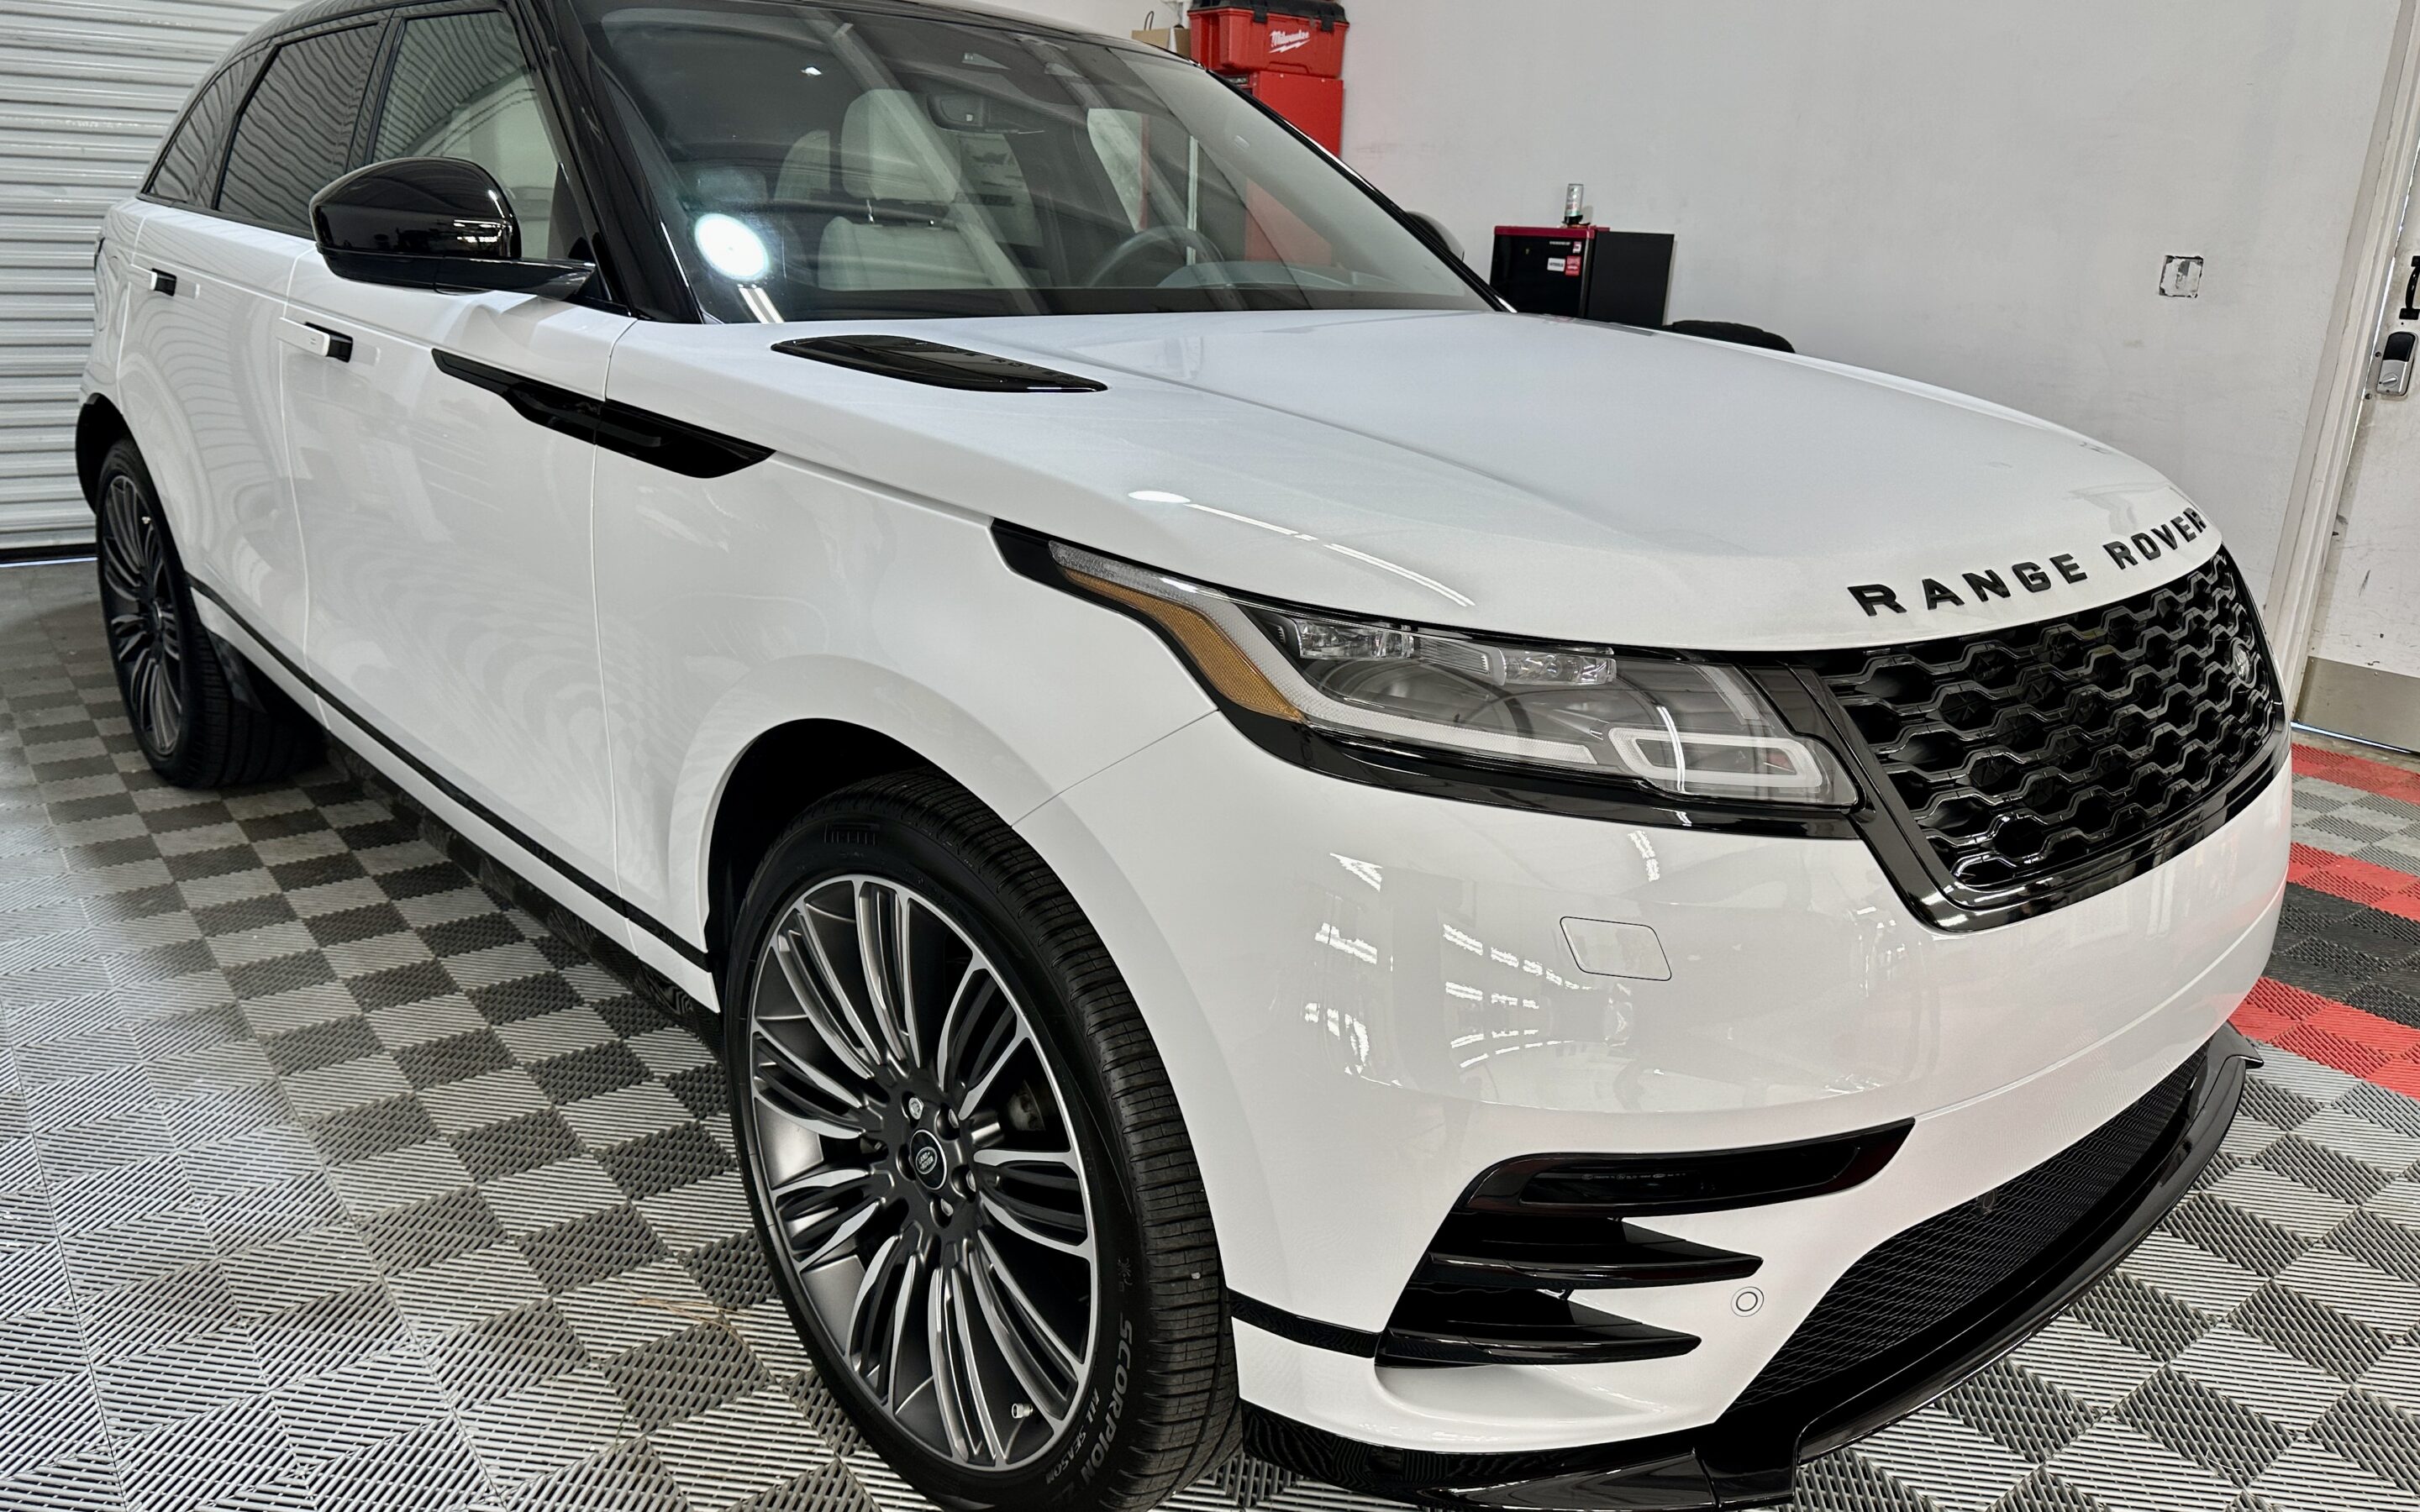 Ceramic Coating of a 2022 Land Rover Range Rover